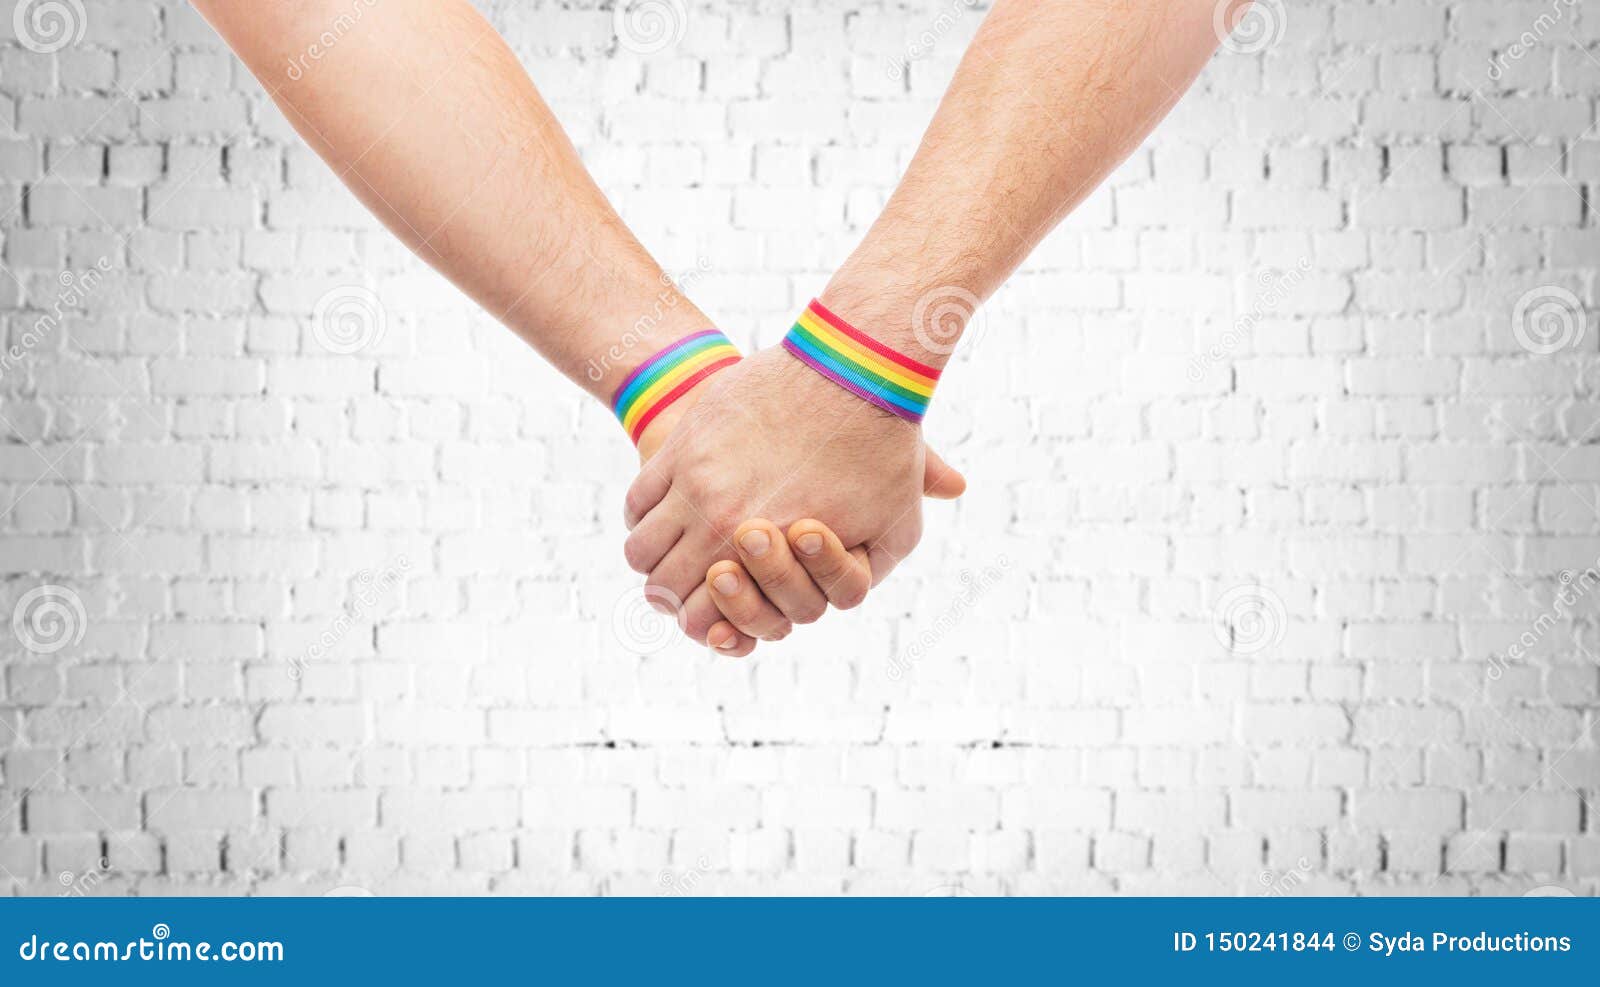 hands of couple with gay pride rainbow wristbands